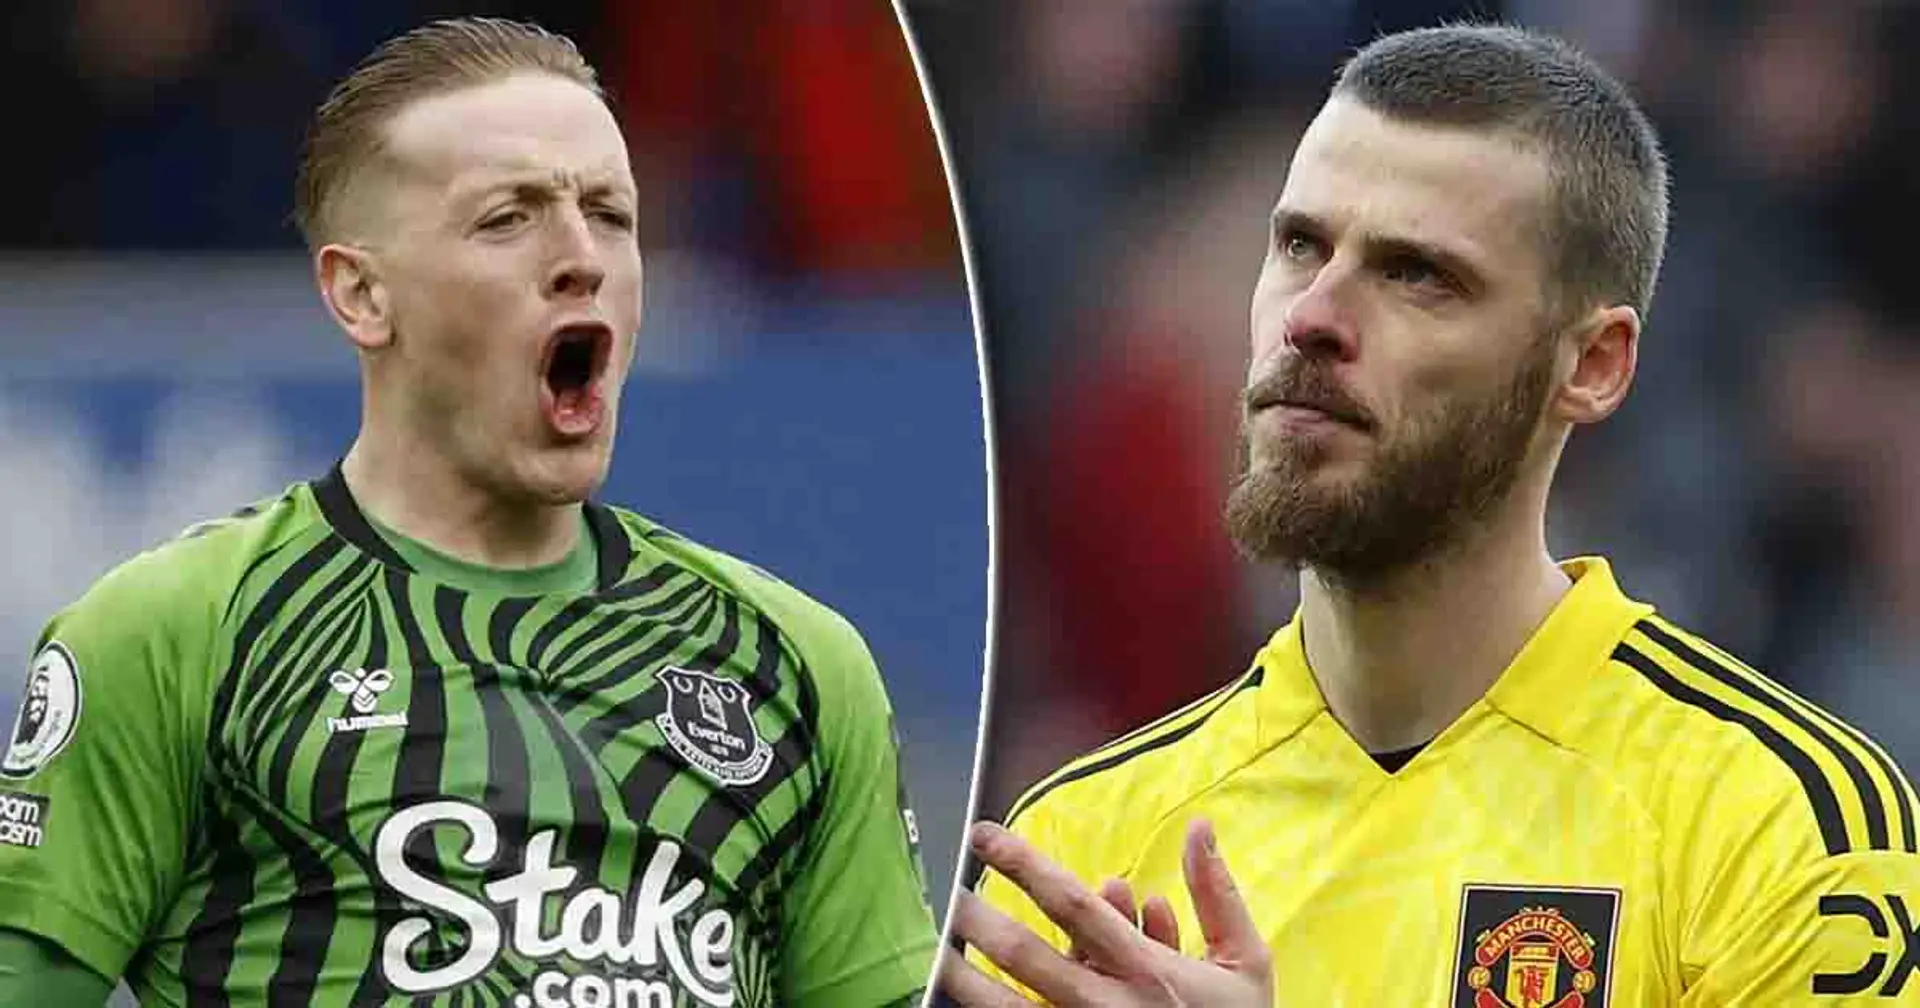 Man United ready to make opening offer for Jordan Pickford signing, details revealed (reliability: 3 stars)